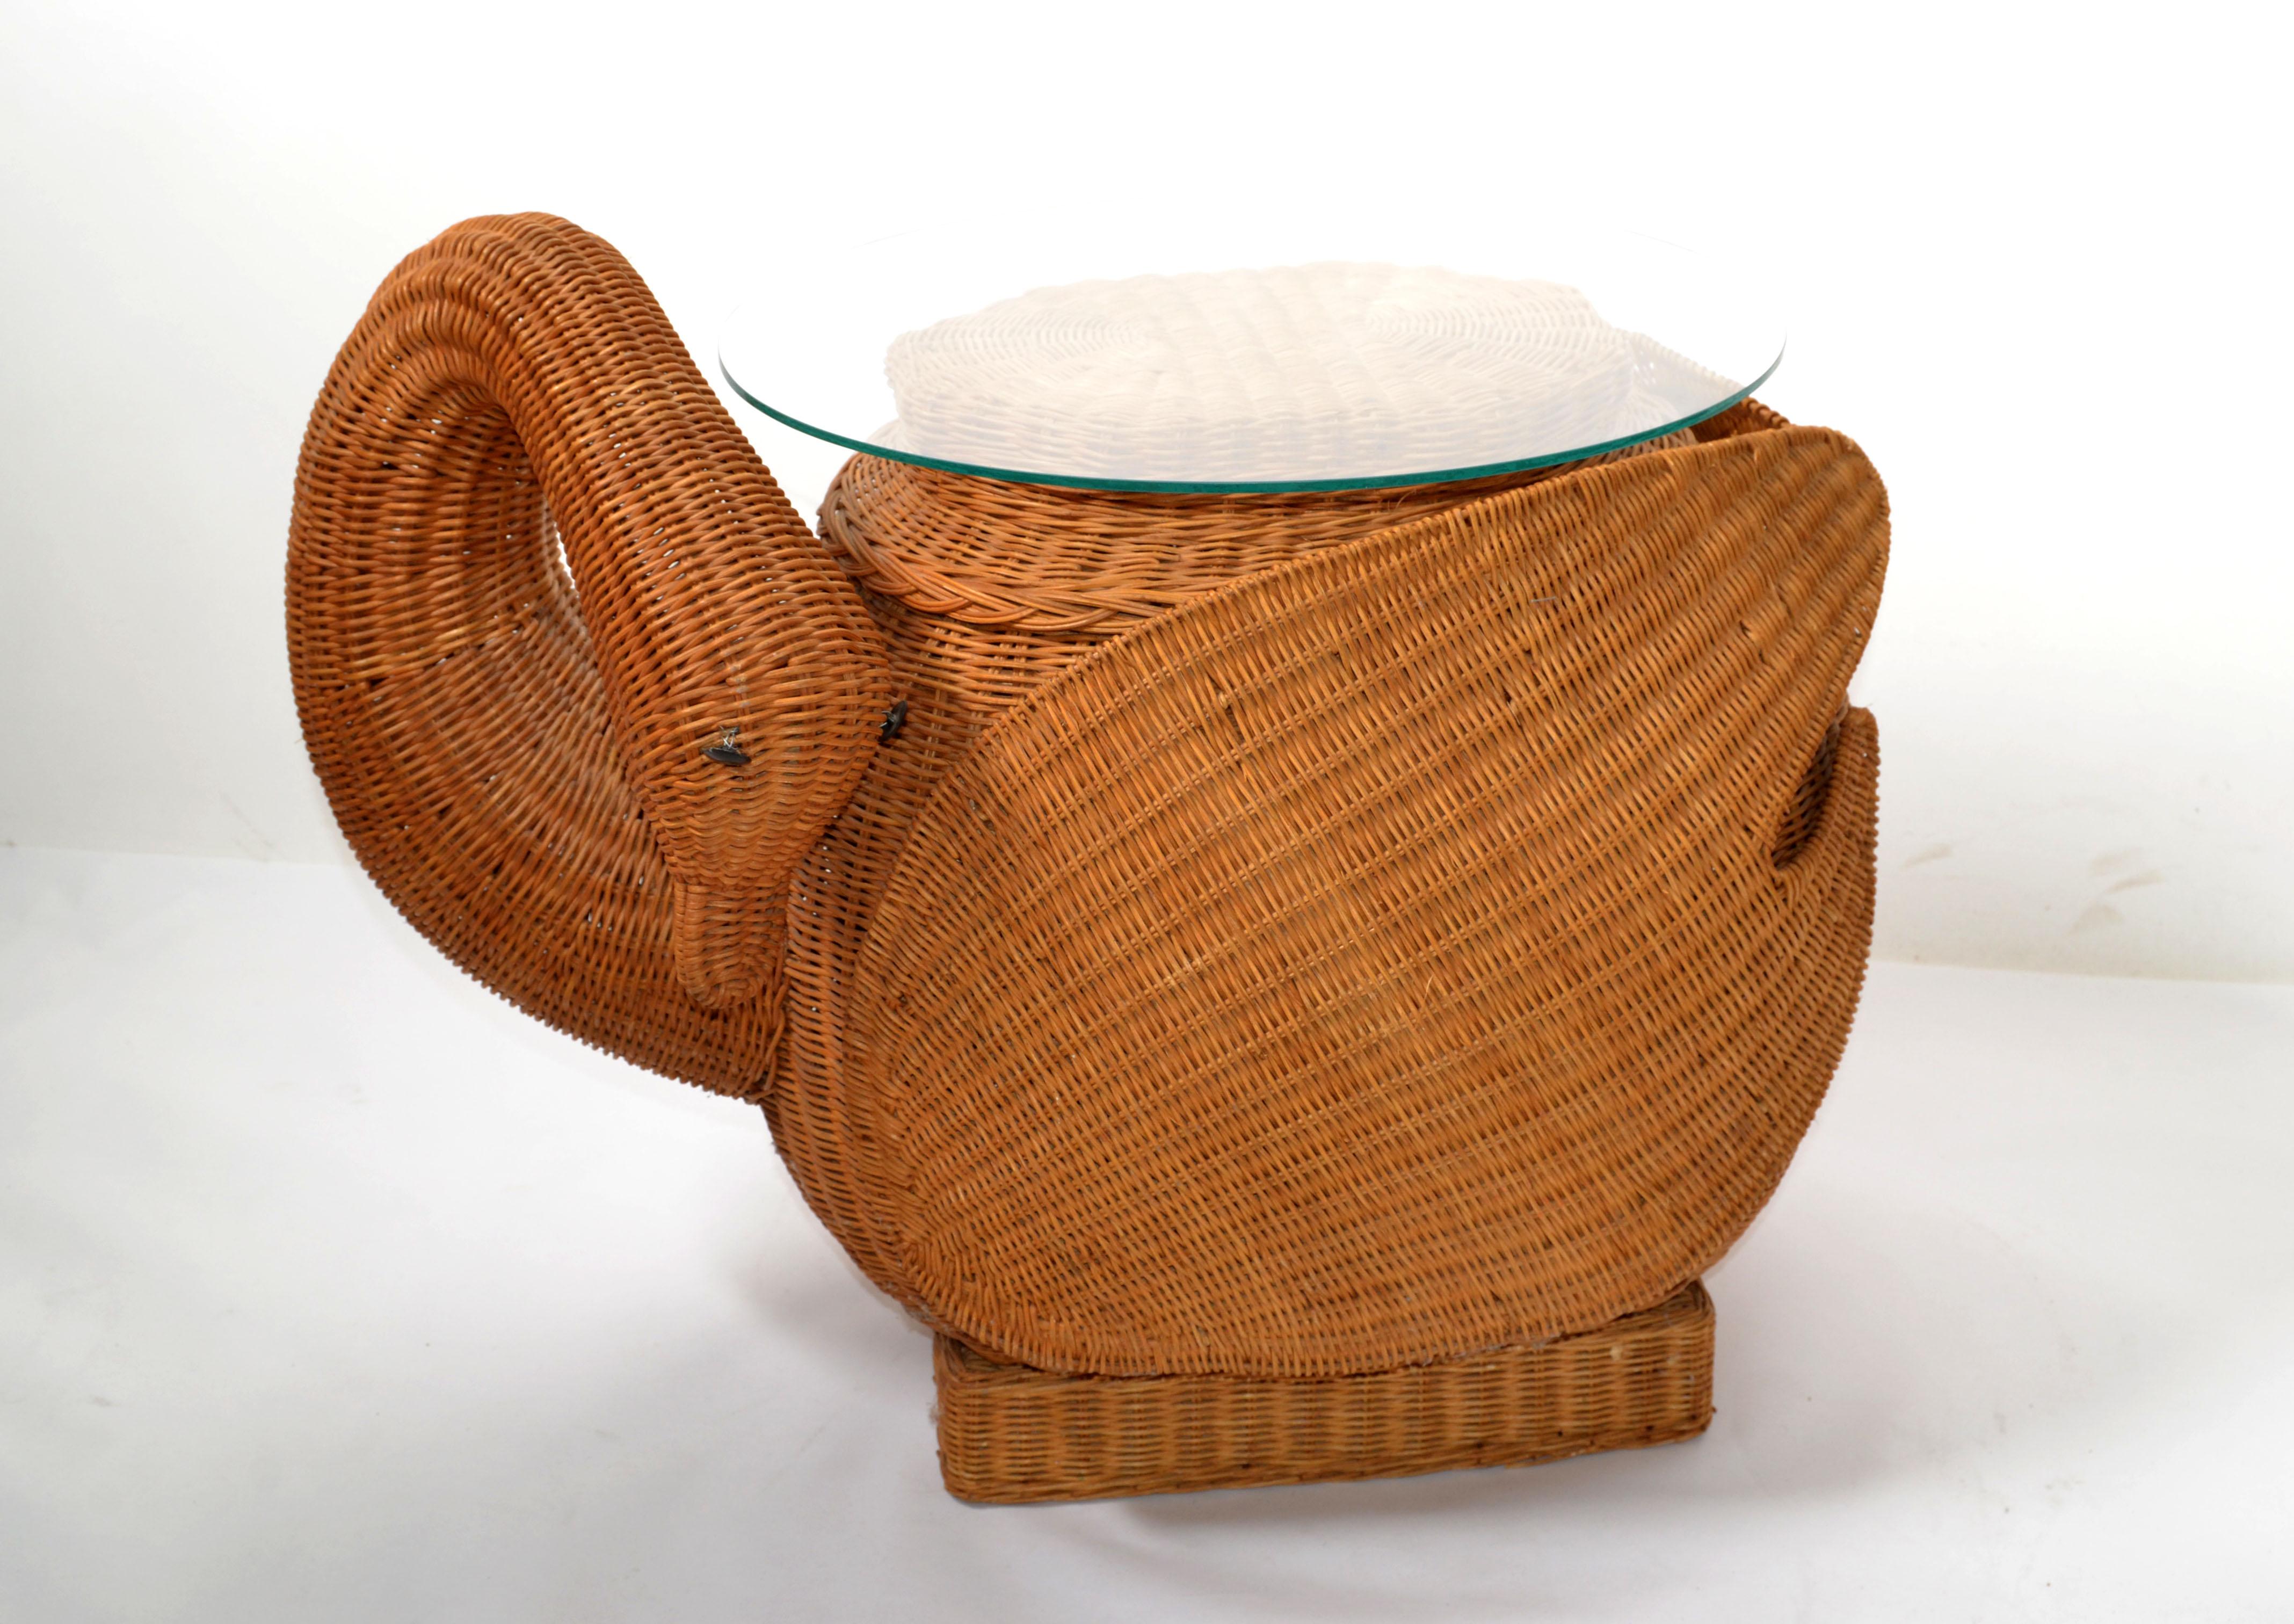 Mario Lopez Torres Style Mid-Century Modern hand-woven Swan coffee, side or cocktail table with round small glass top.
Bohemian Style made in America in the late 20th Century.
Comes with the 18.5 inches diameter Glass Top.
All original condition